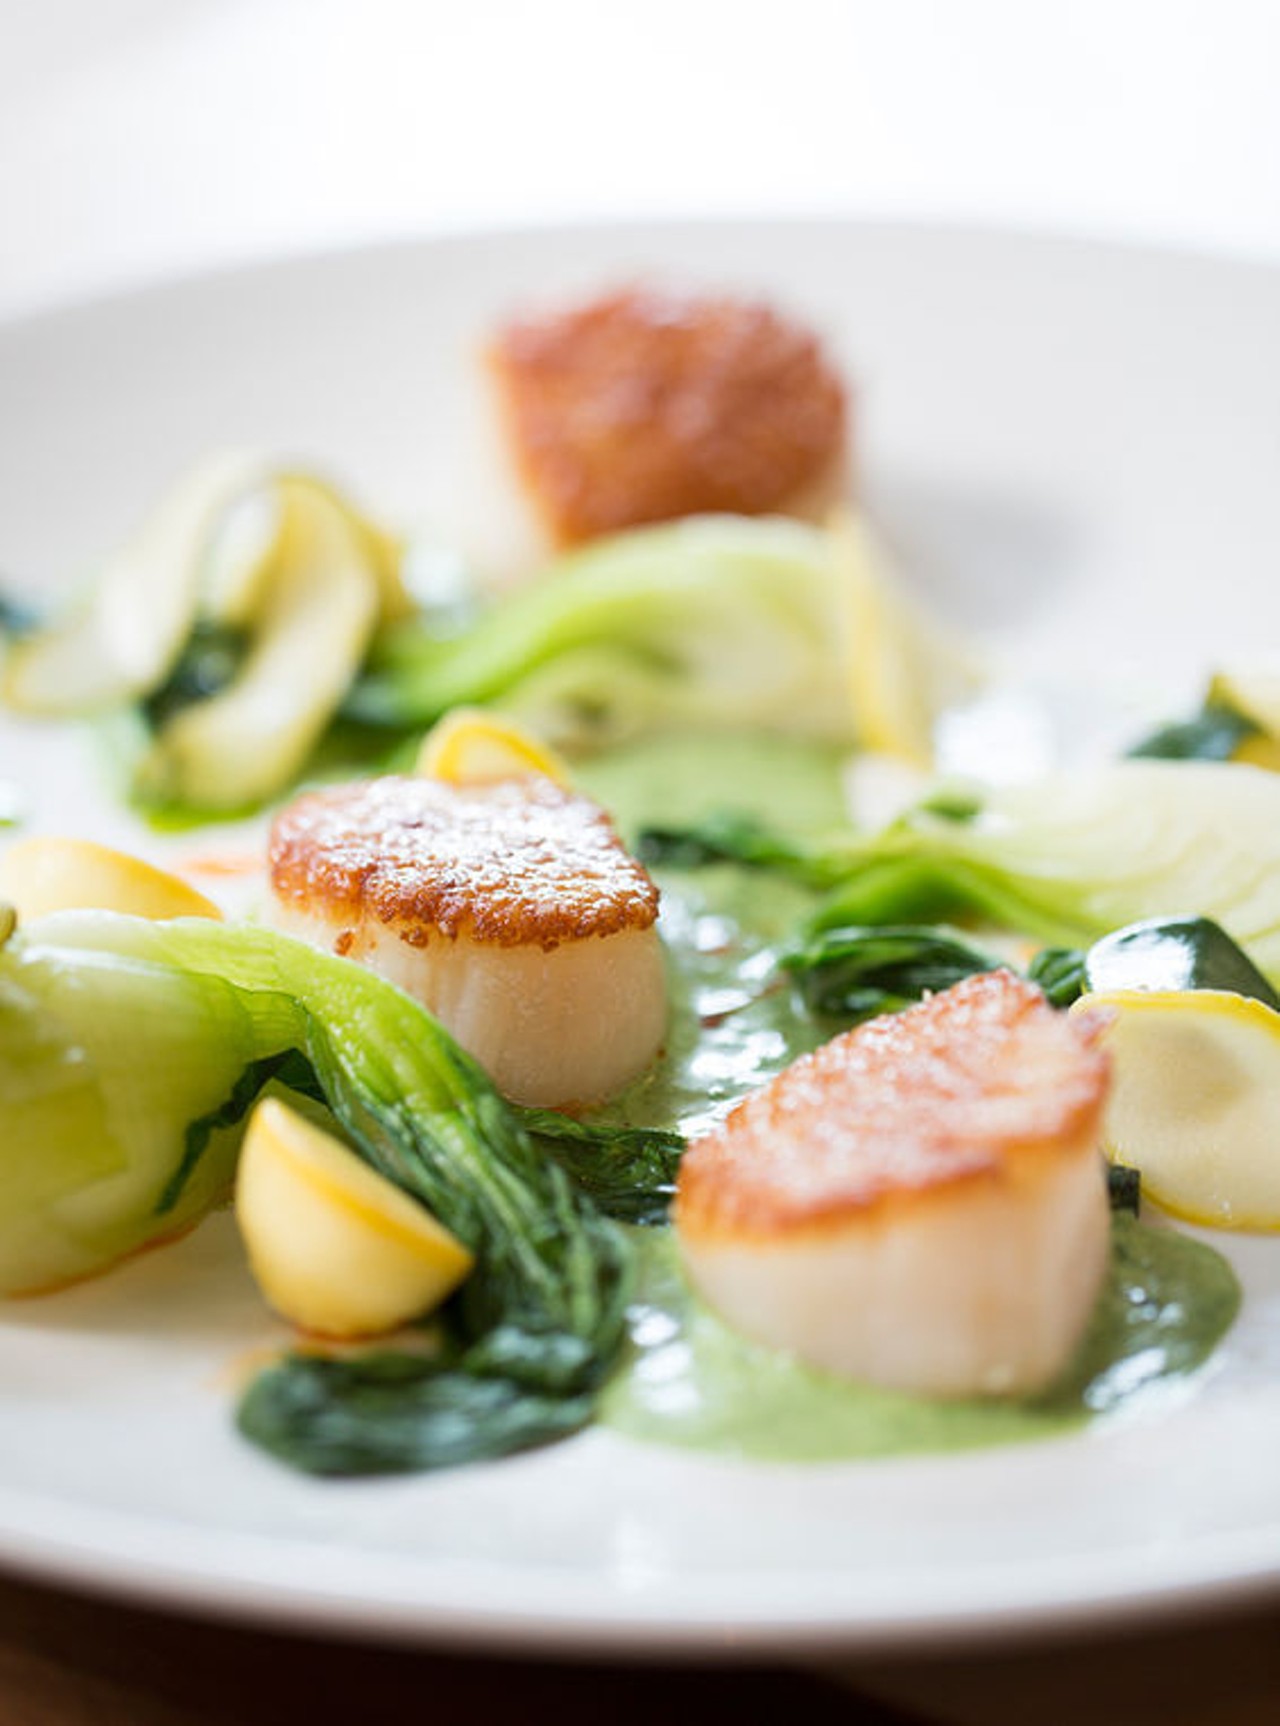 At Central Table Food Hall in the Central West End: An order of scallops comes with summer squash, arugula and bok choy. See more photos from Central Table Food Hall. Photo by Jennifer Silverberg.